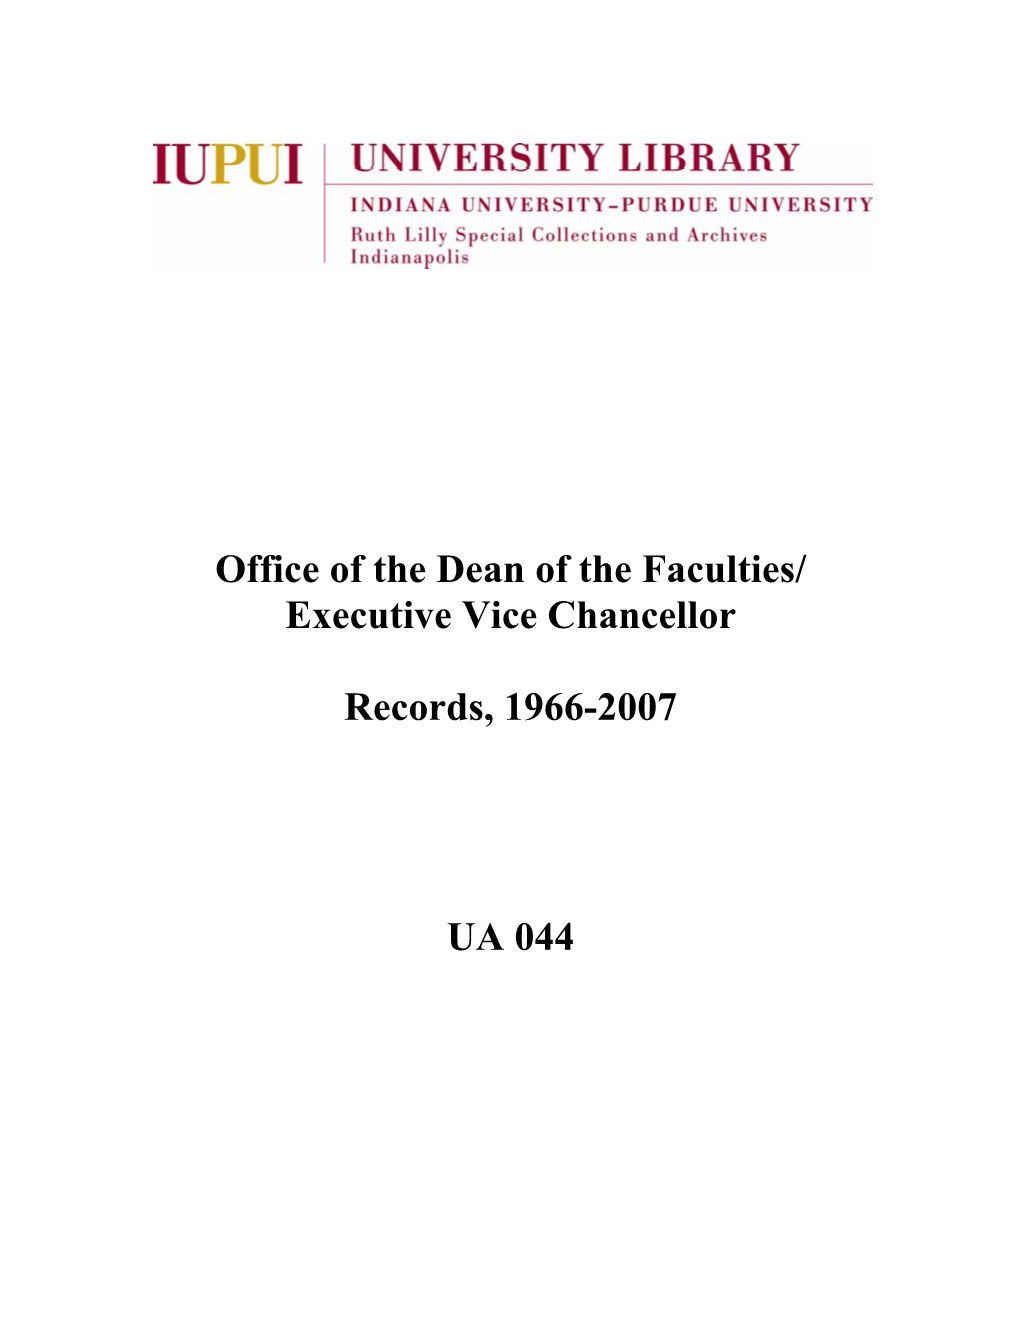 Office of the Dean of the Faculties/ Executive Vice Chancellor